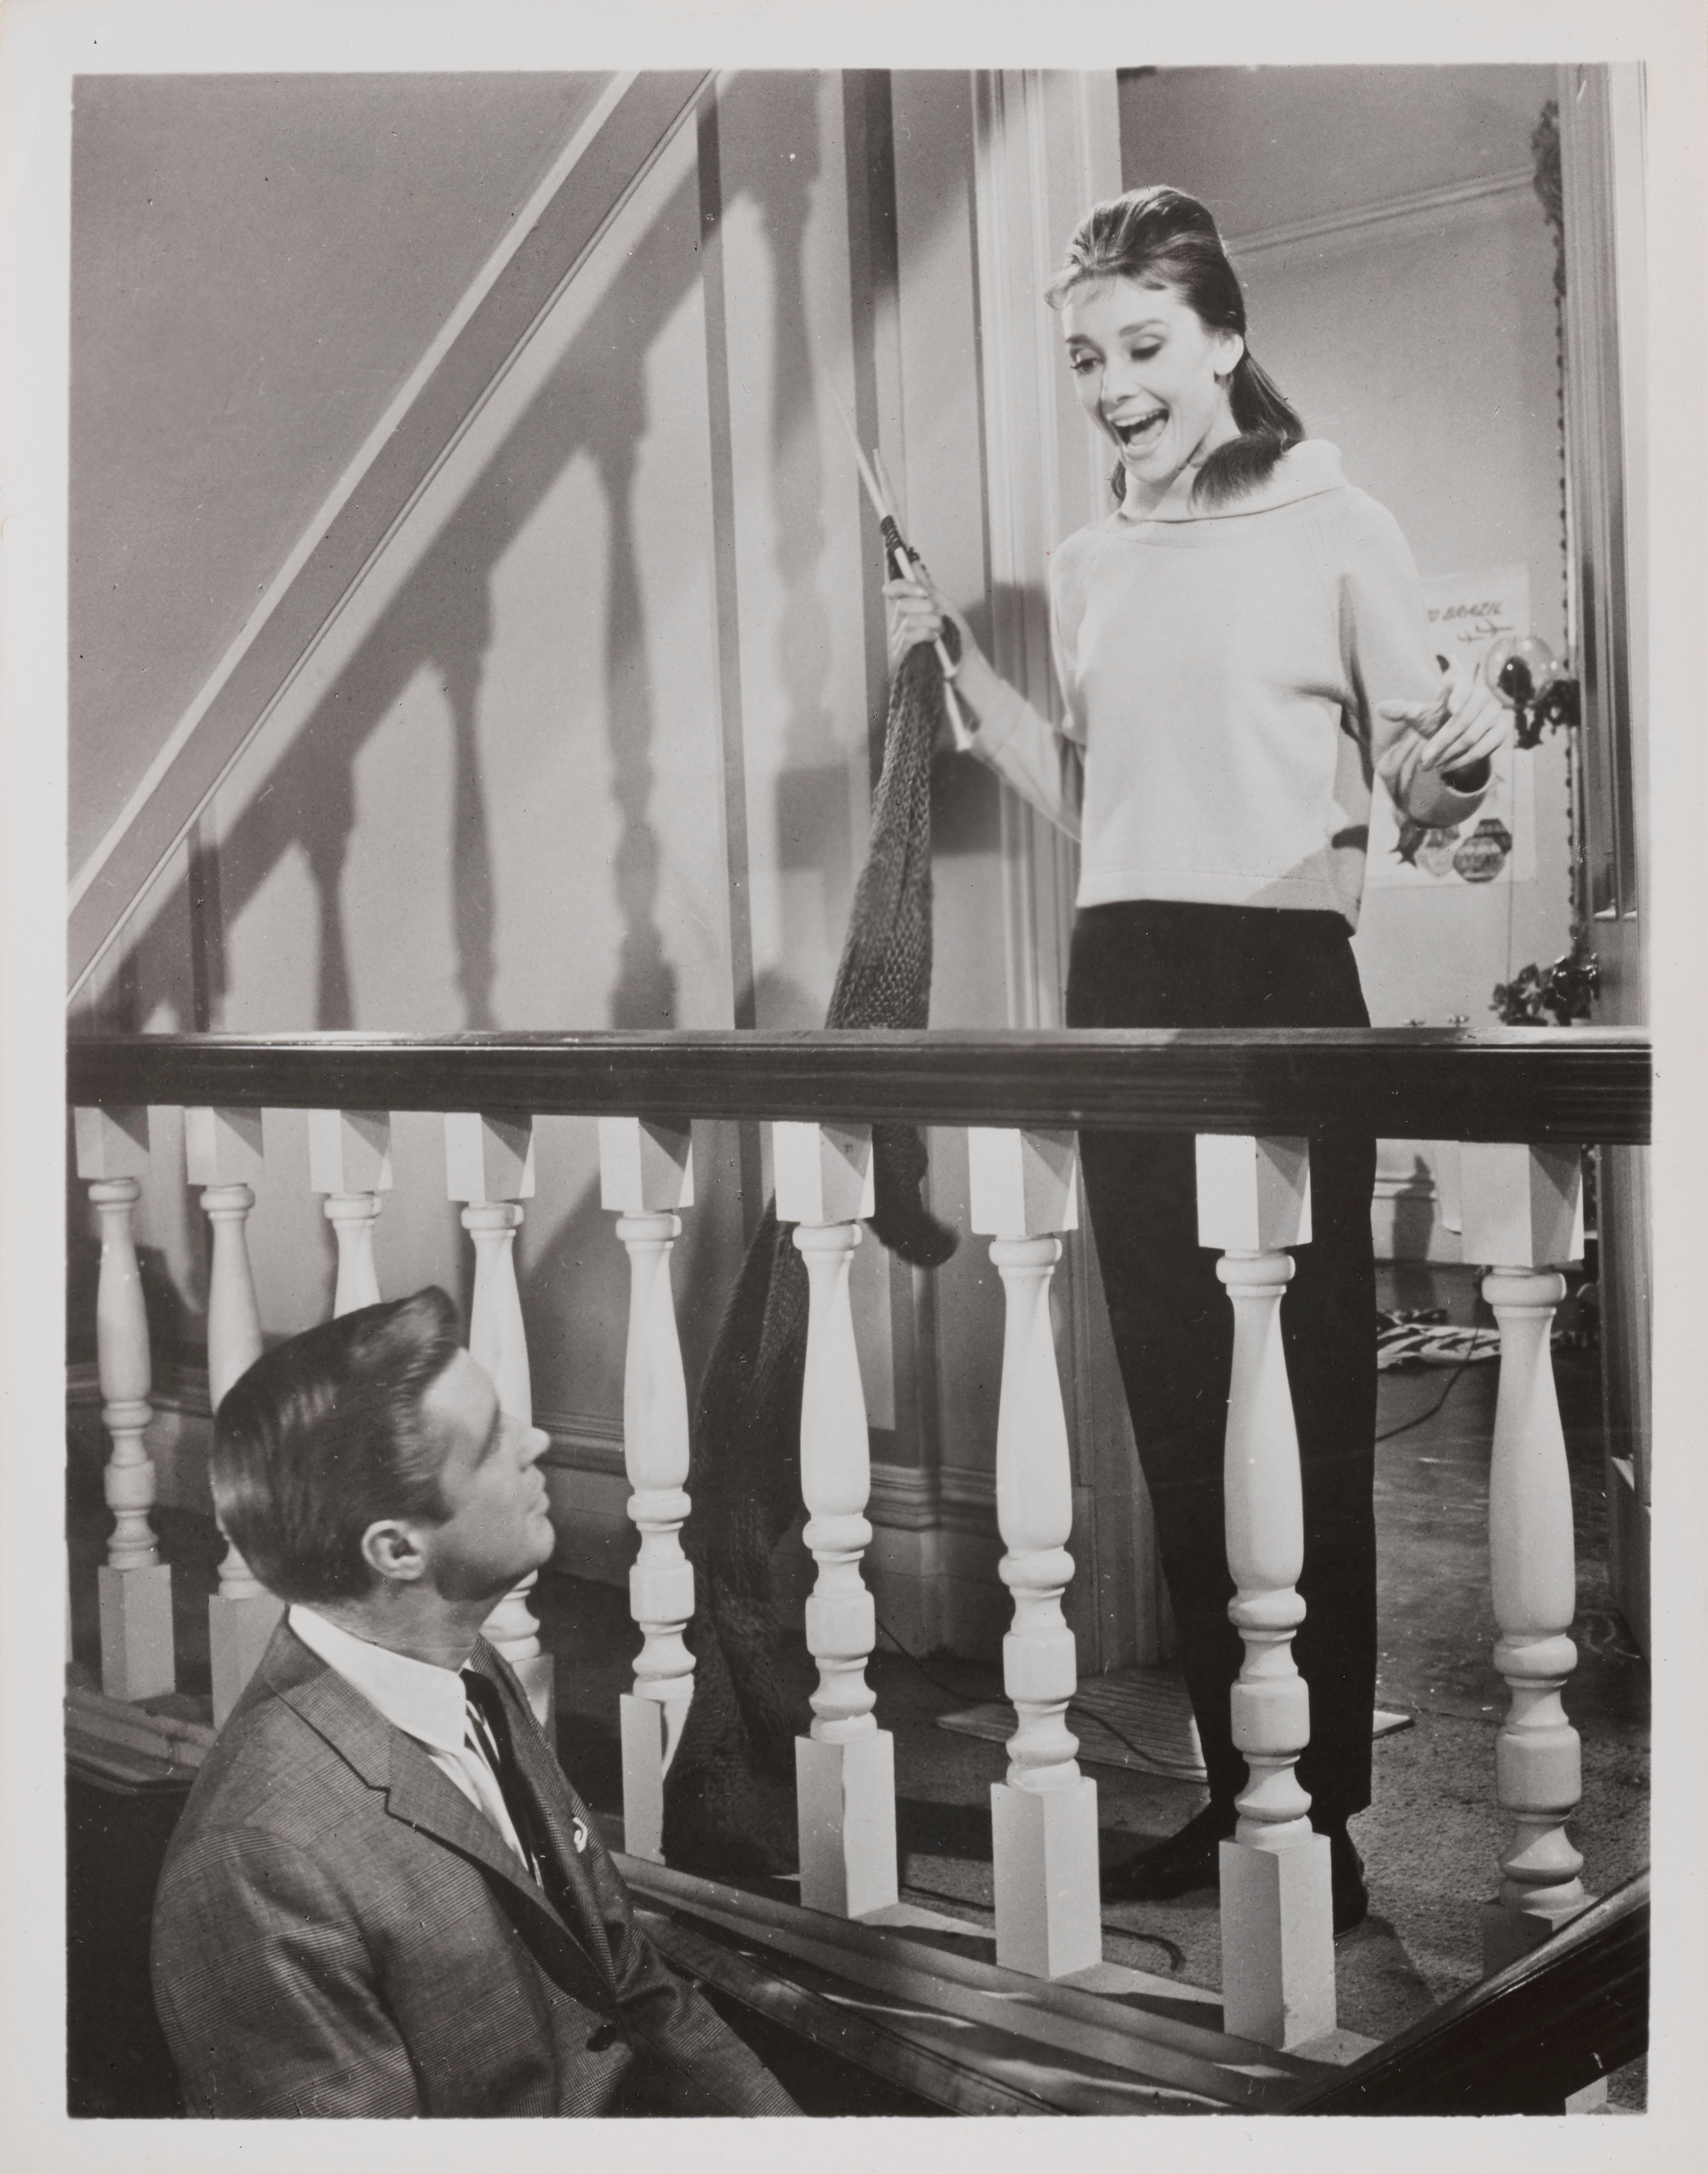 Original Swiss black and white photographic production still from Audrey Hepburn, George Peppard's Classic, 1961 romance.